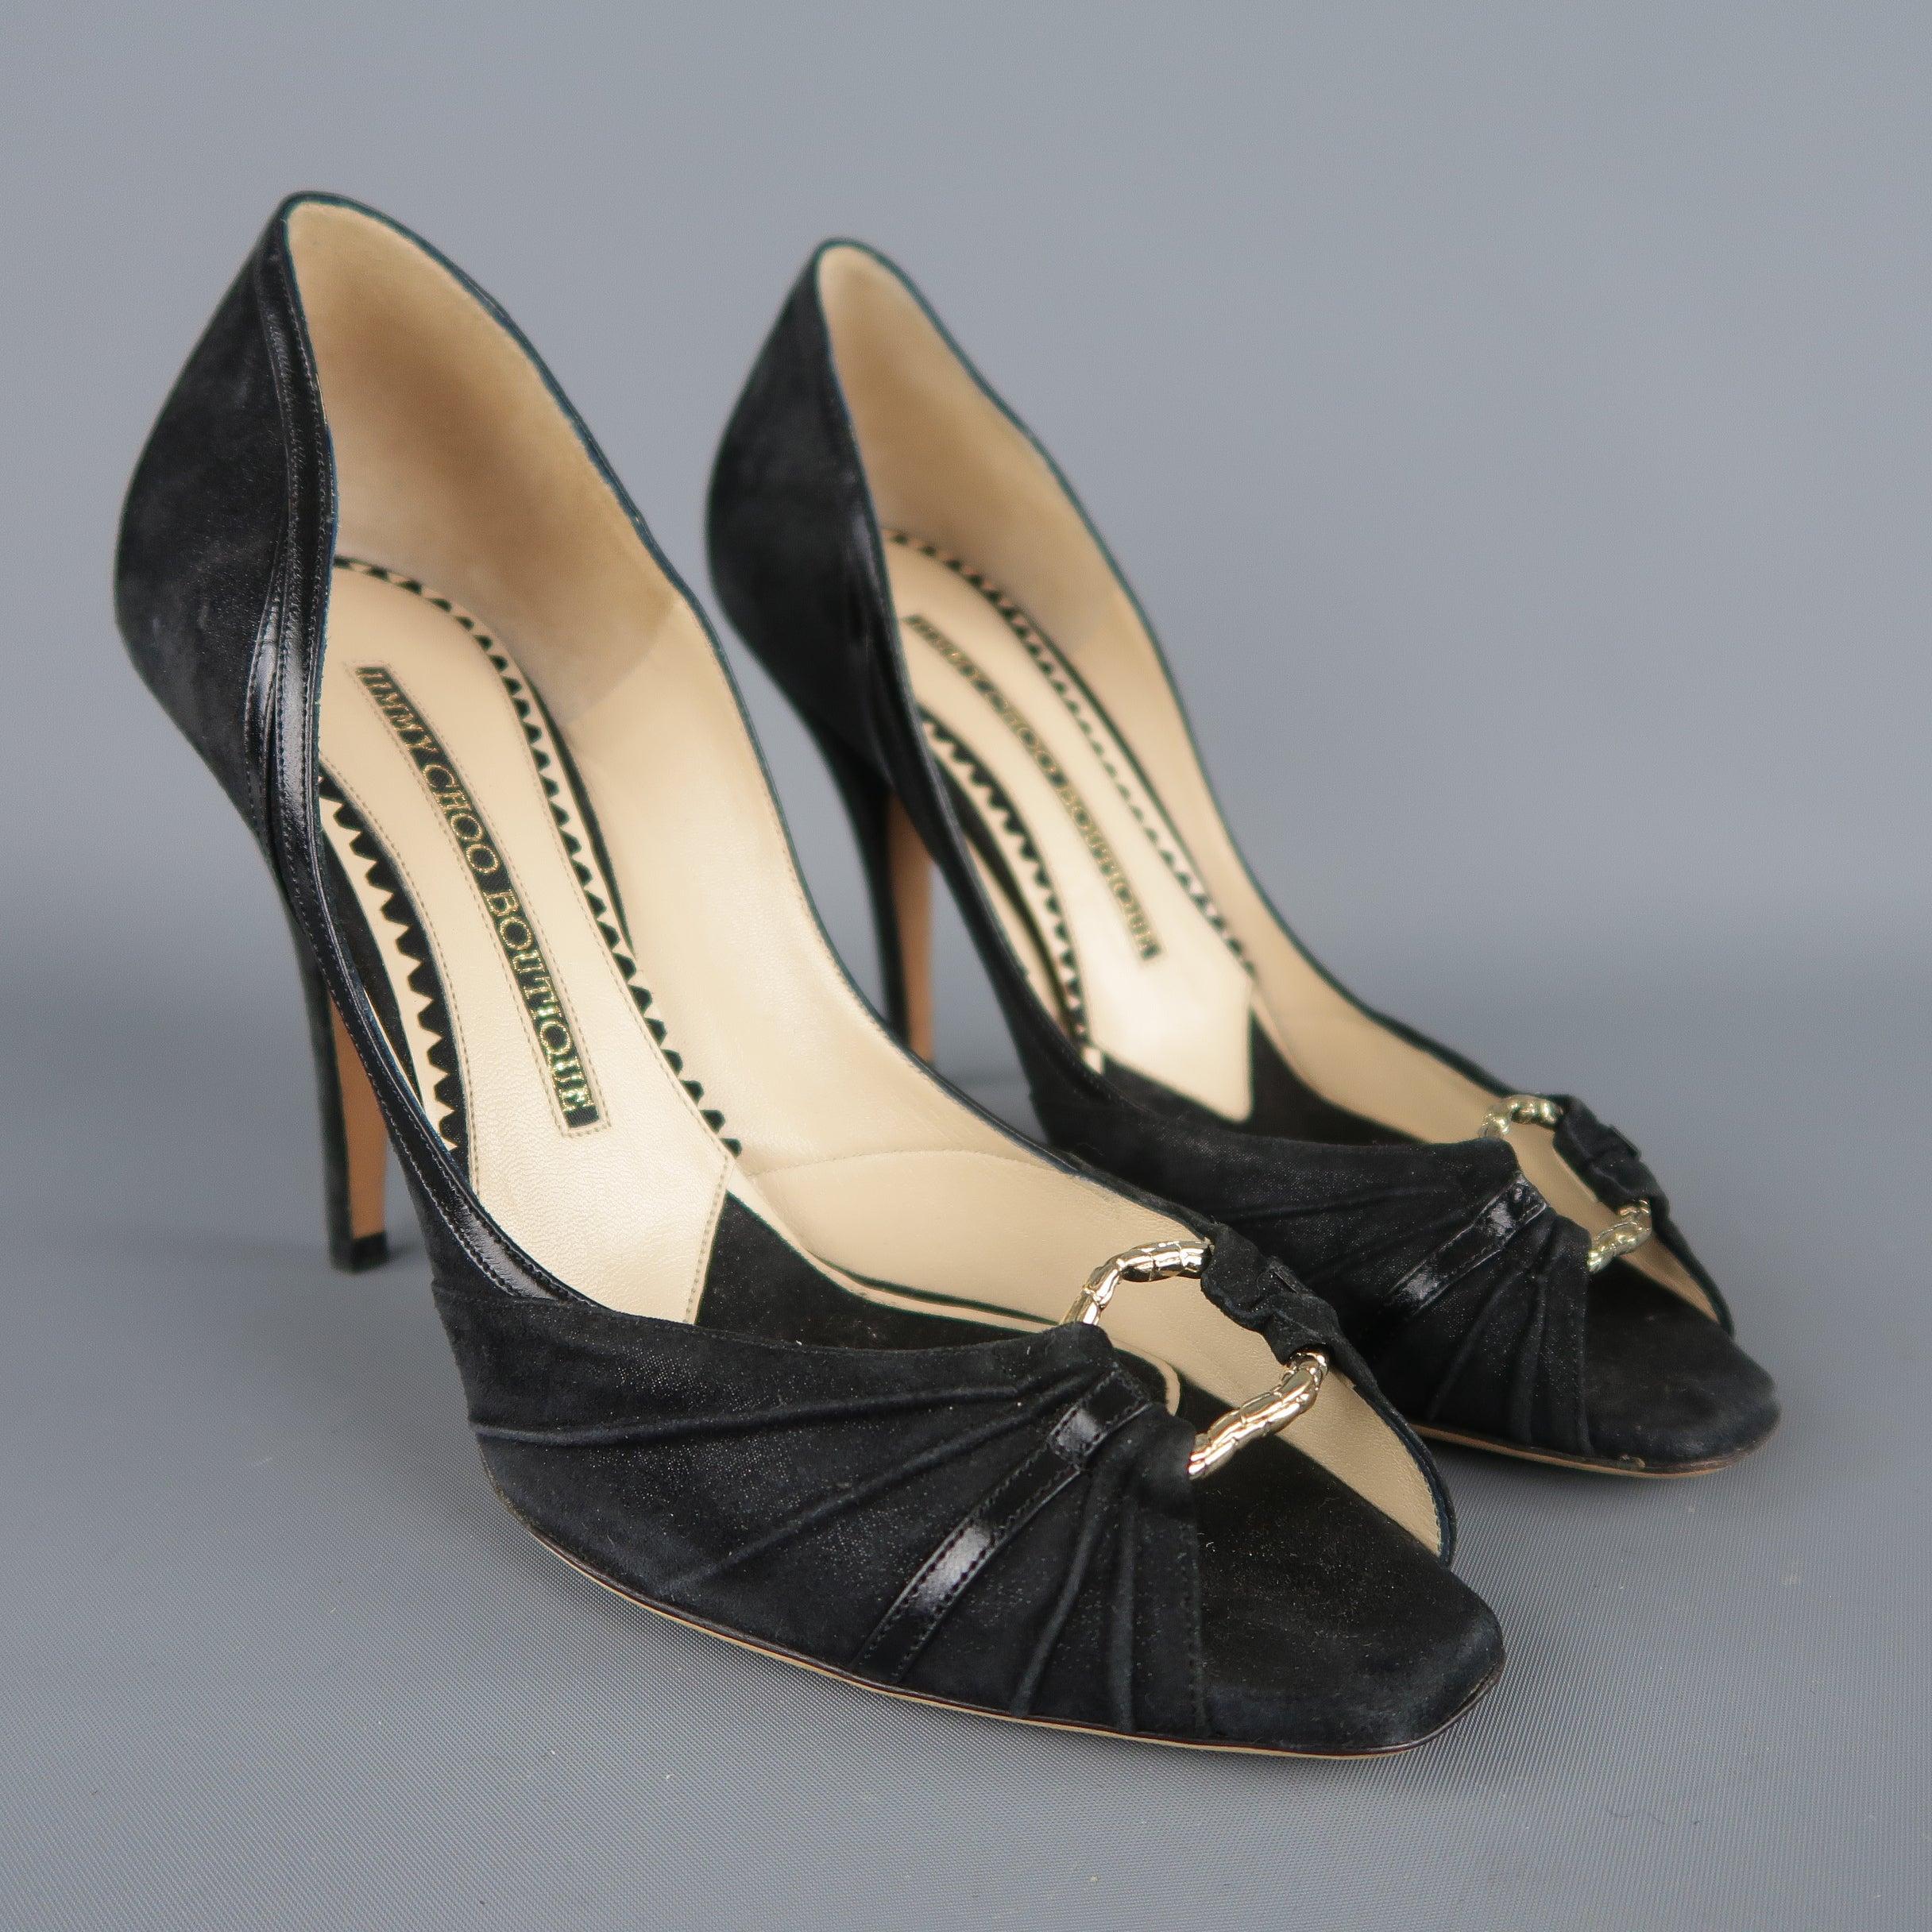 JIMMY CHOO BOUTIQUE pumps come in metallic suede with black leather piping, and gathered peep toe with gold tone hoop. Made in Italy.Excellent Pre-Owned Condition. 

Marked:   IT 39 

Measurements: 
  Heel: 4 inches 
 
  
  
 
Reference: